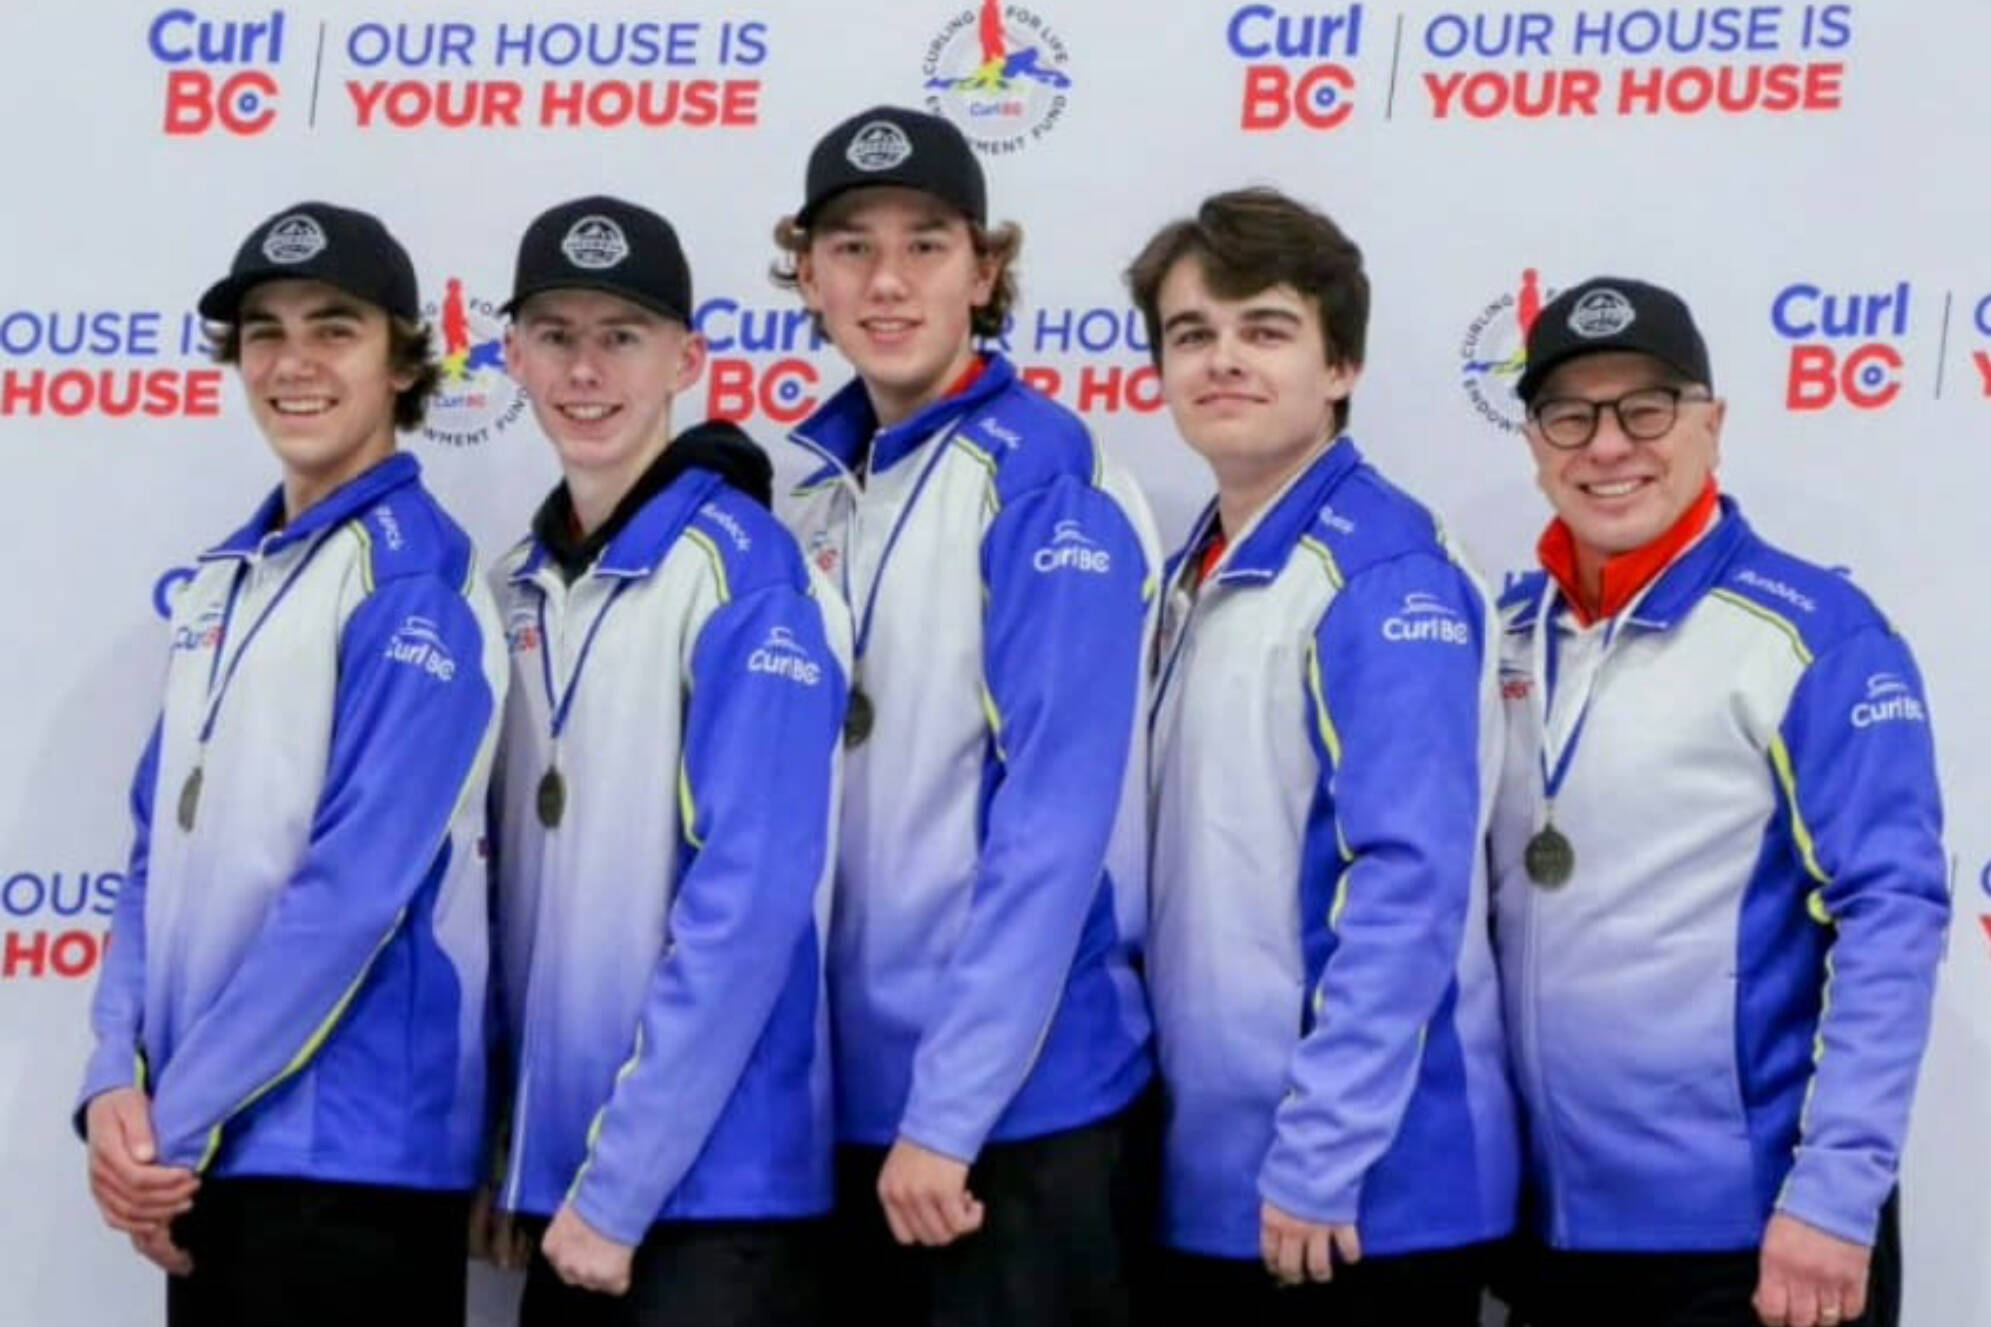 Team Blaeser, made up of Kaiden Beck, Nolan Blaeser, Nolan Beck and Koen Hampshire and coach Dale Hofer, all from Salmon Arm-Vernon, are off to an 0-2 start at the Under 18 Canadian Curling Championship in Timmins, Ont. (Team Blaeser Facebook)